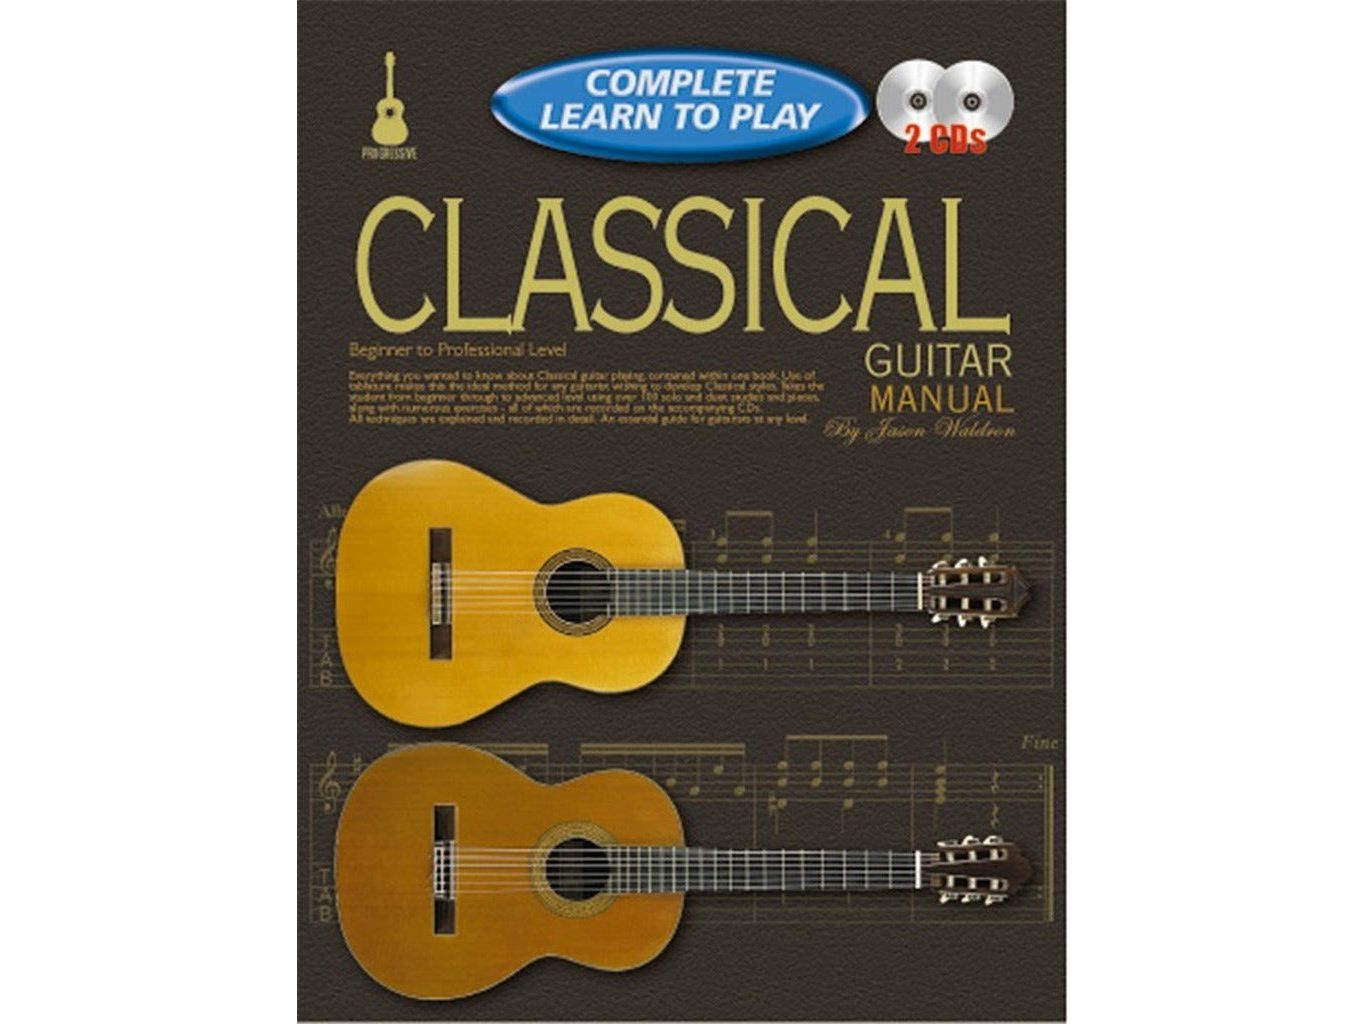 Complete Learn To Play Classical Guitar Manual + CD